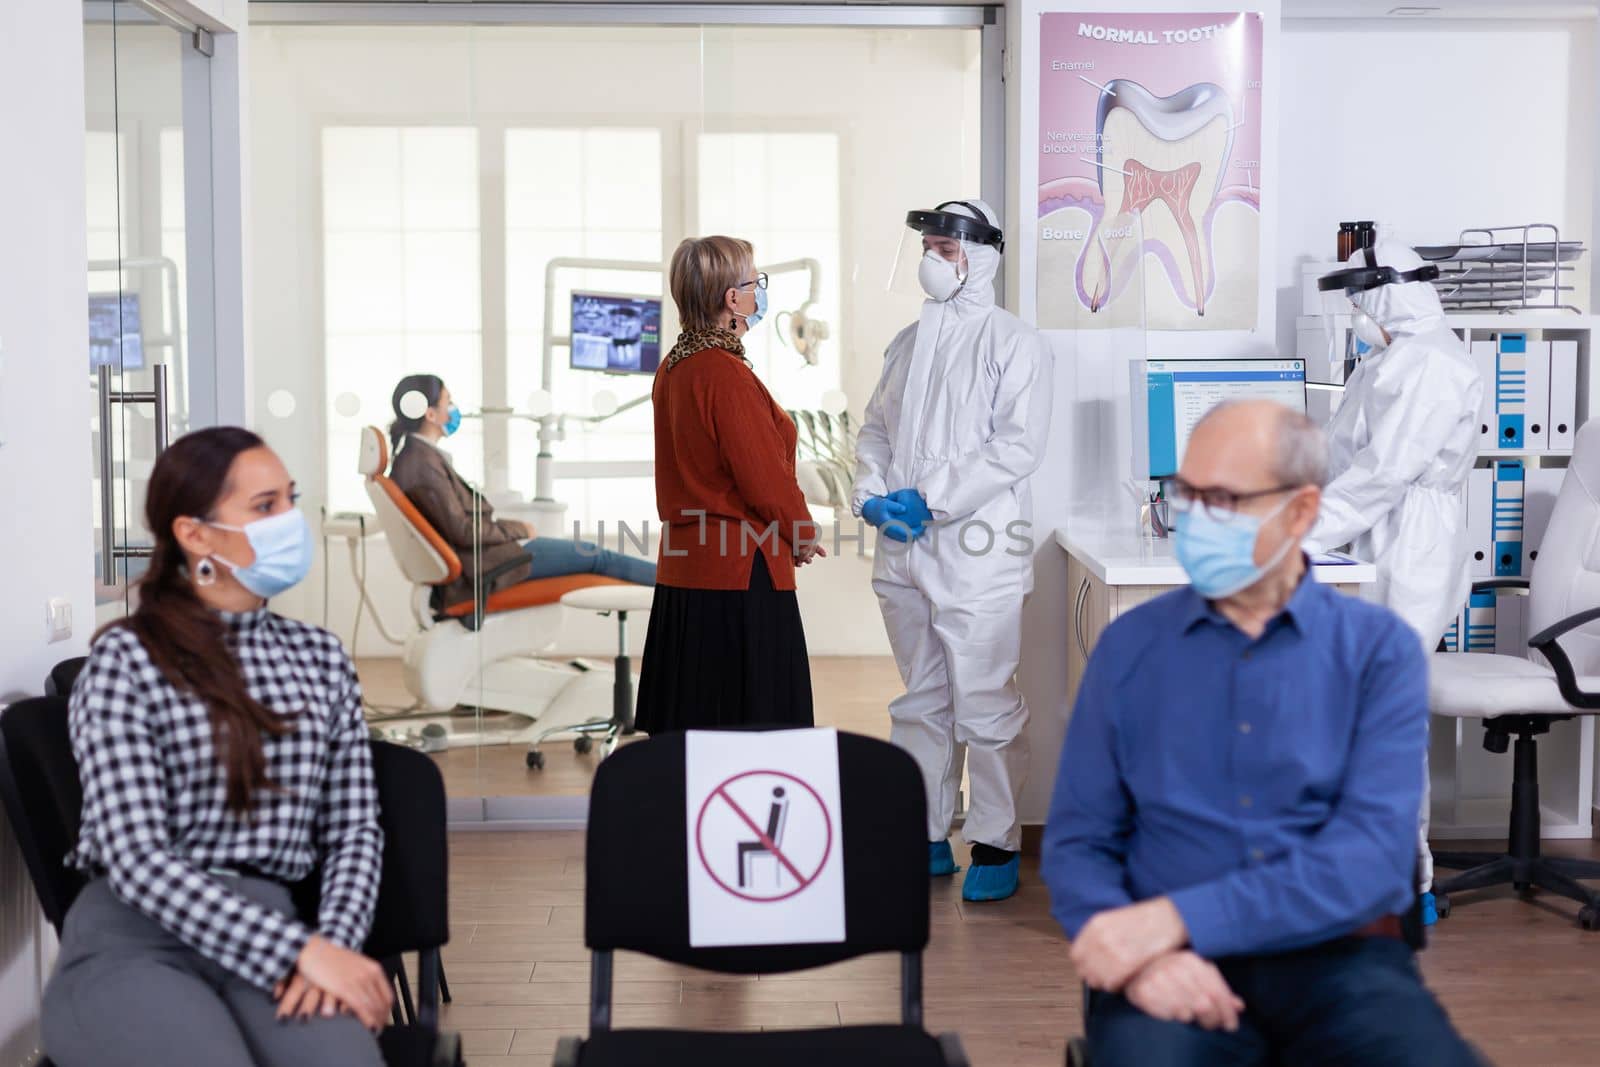 Senior woman patient in stomatology clinic discussing with doctor dressed in ppe suit as safety precaution during global pandemic with coronavirus. People talking in stomatology waiting room.